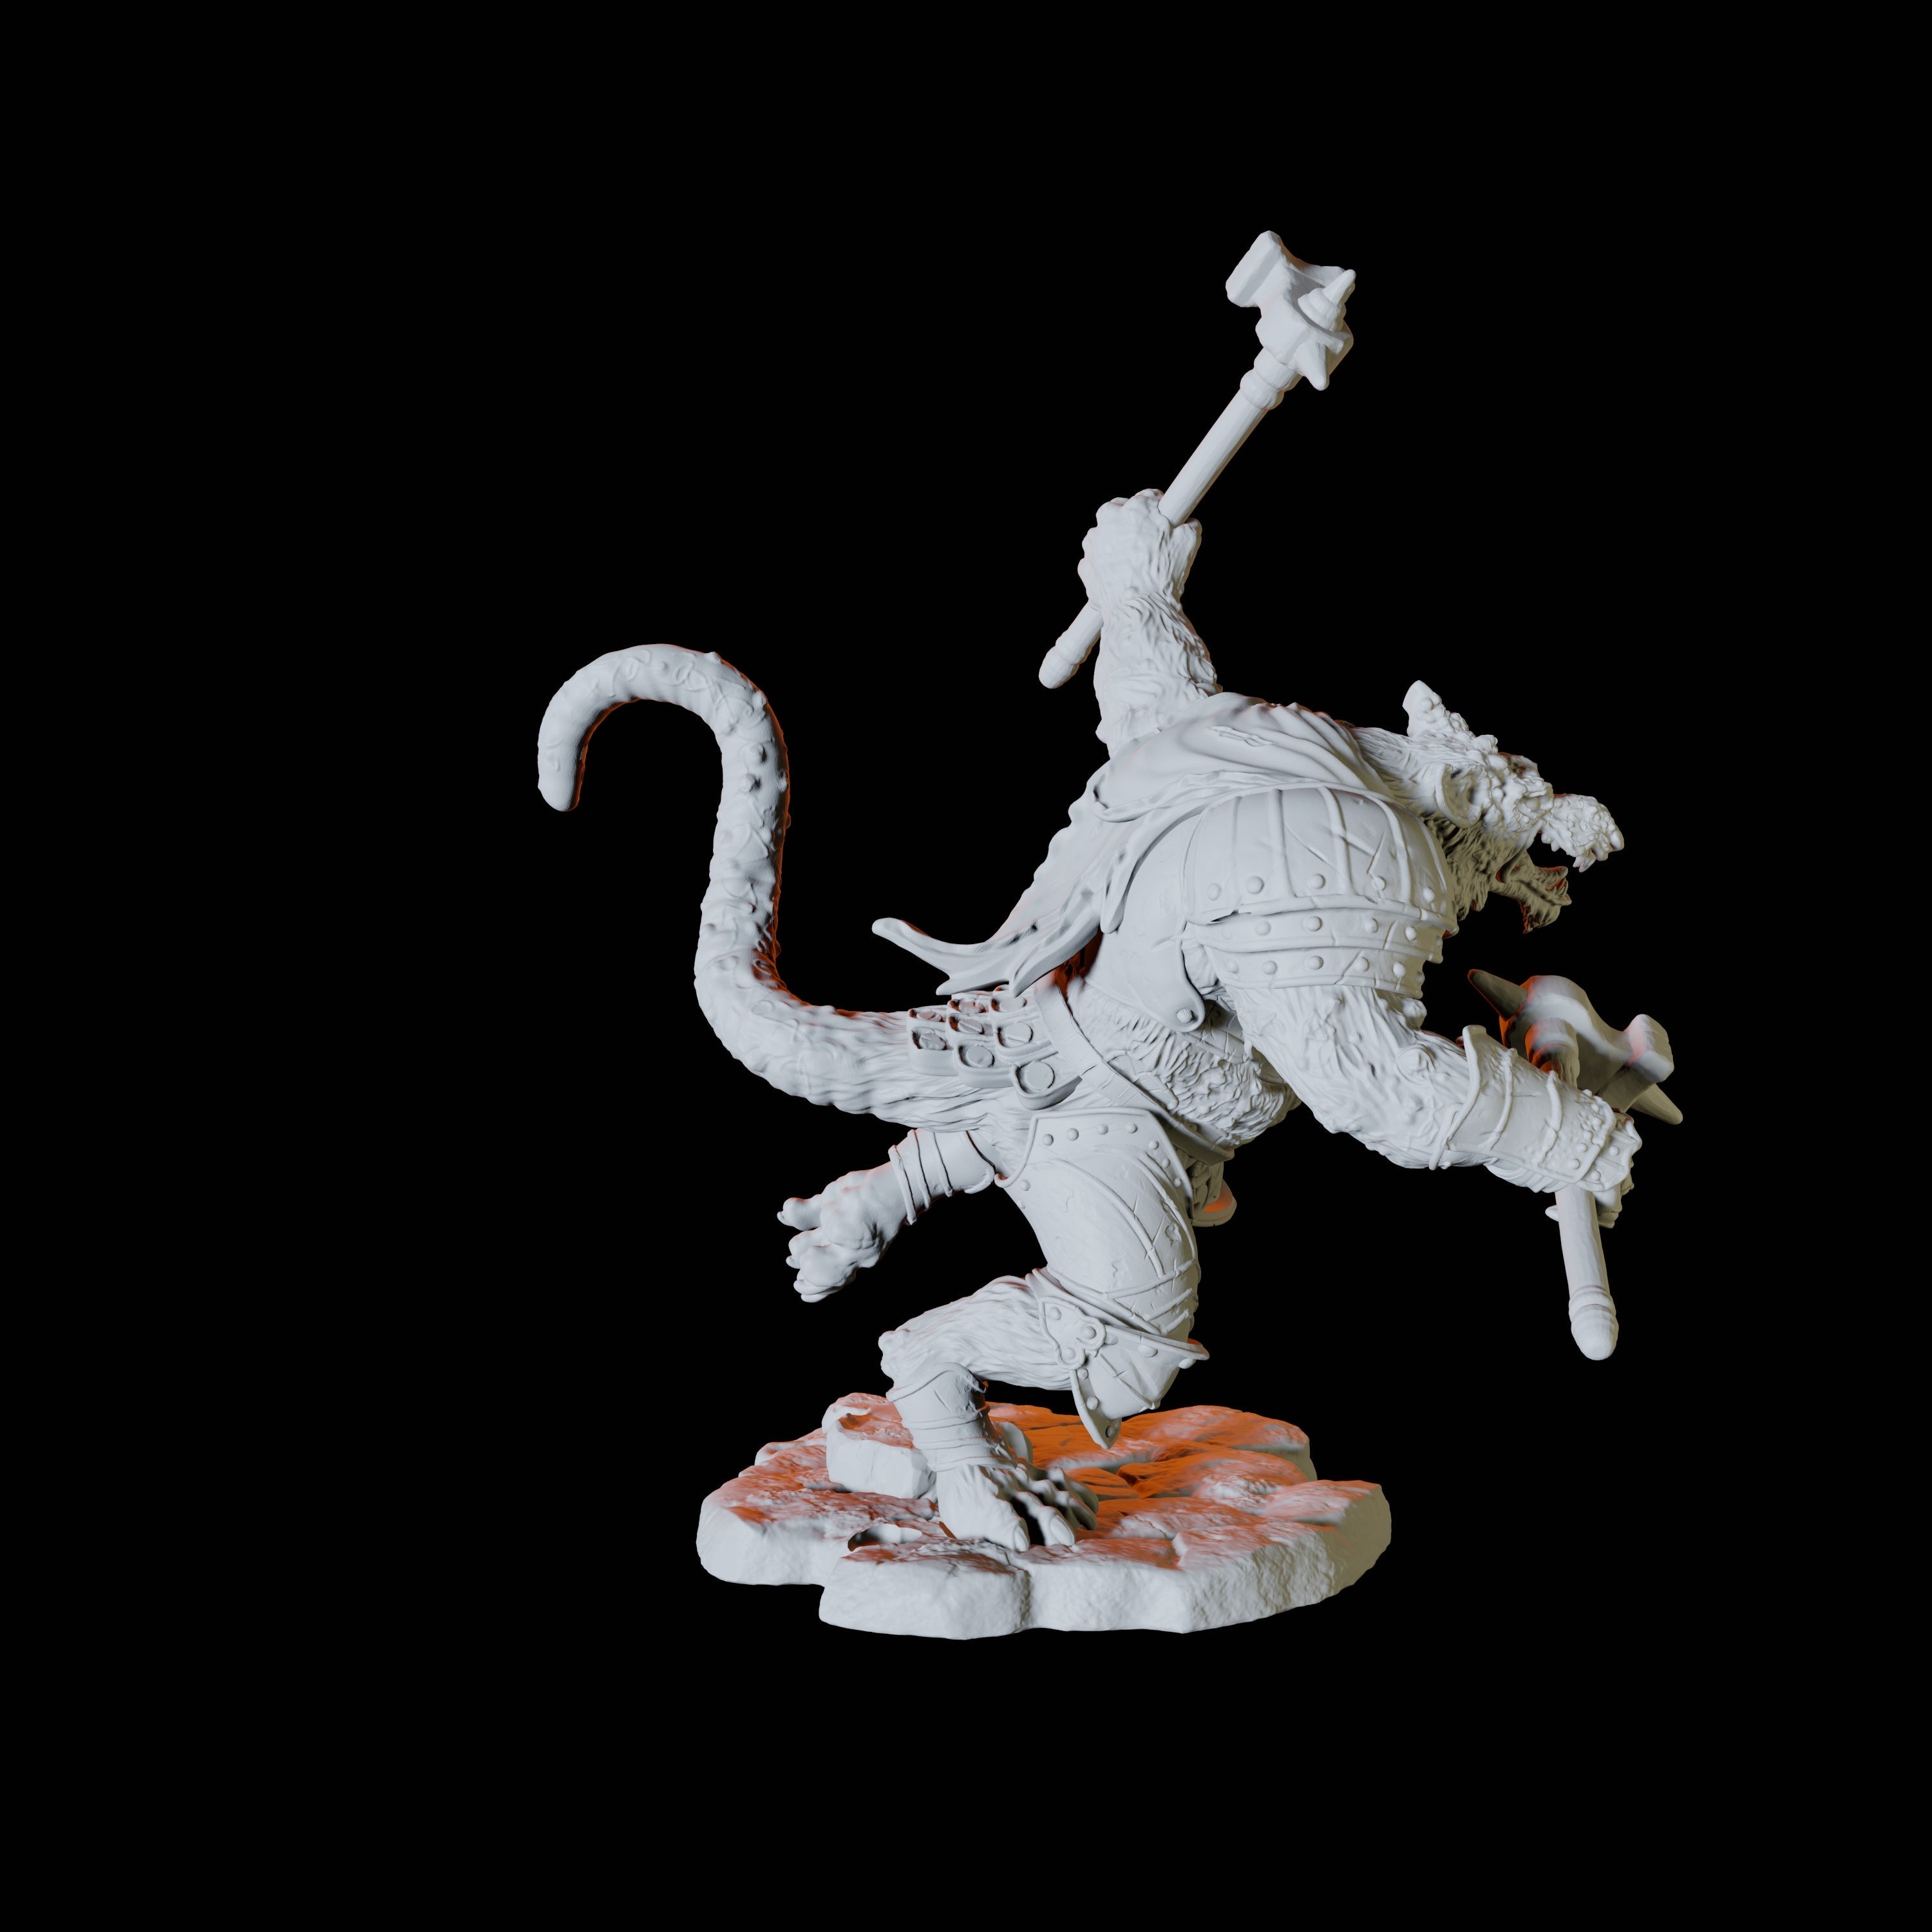 Ratfolk Soldier D Miniature for Dungeons and Dragons, Pathfinder or other TTRPGs